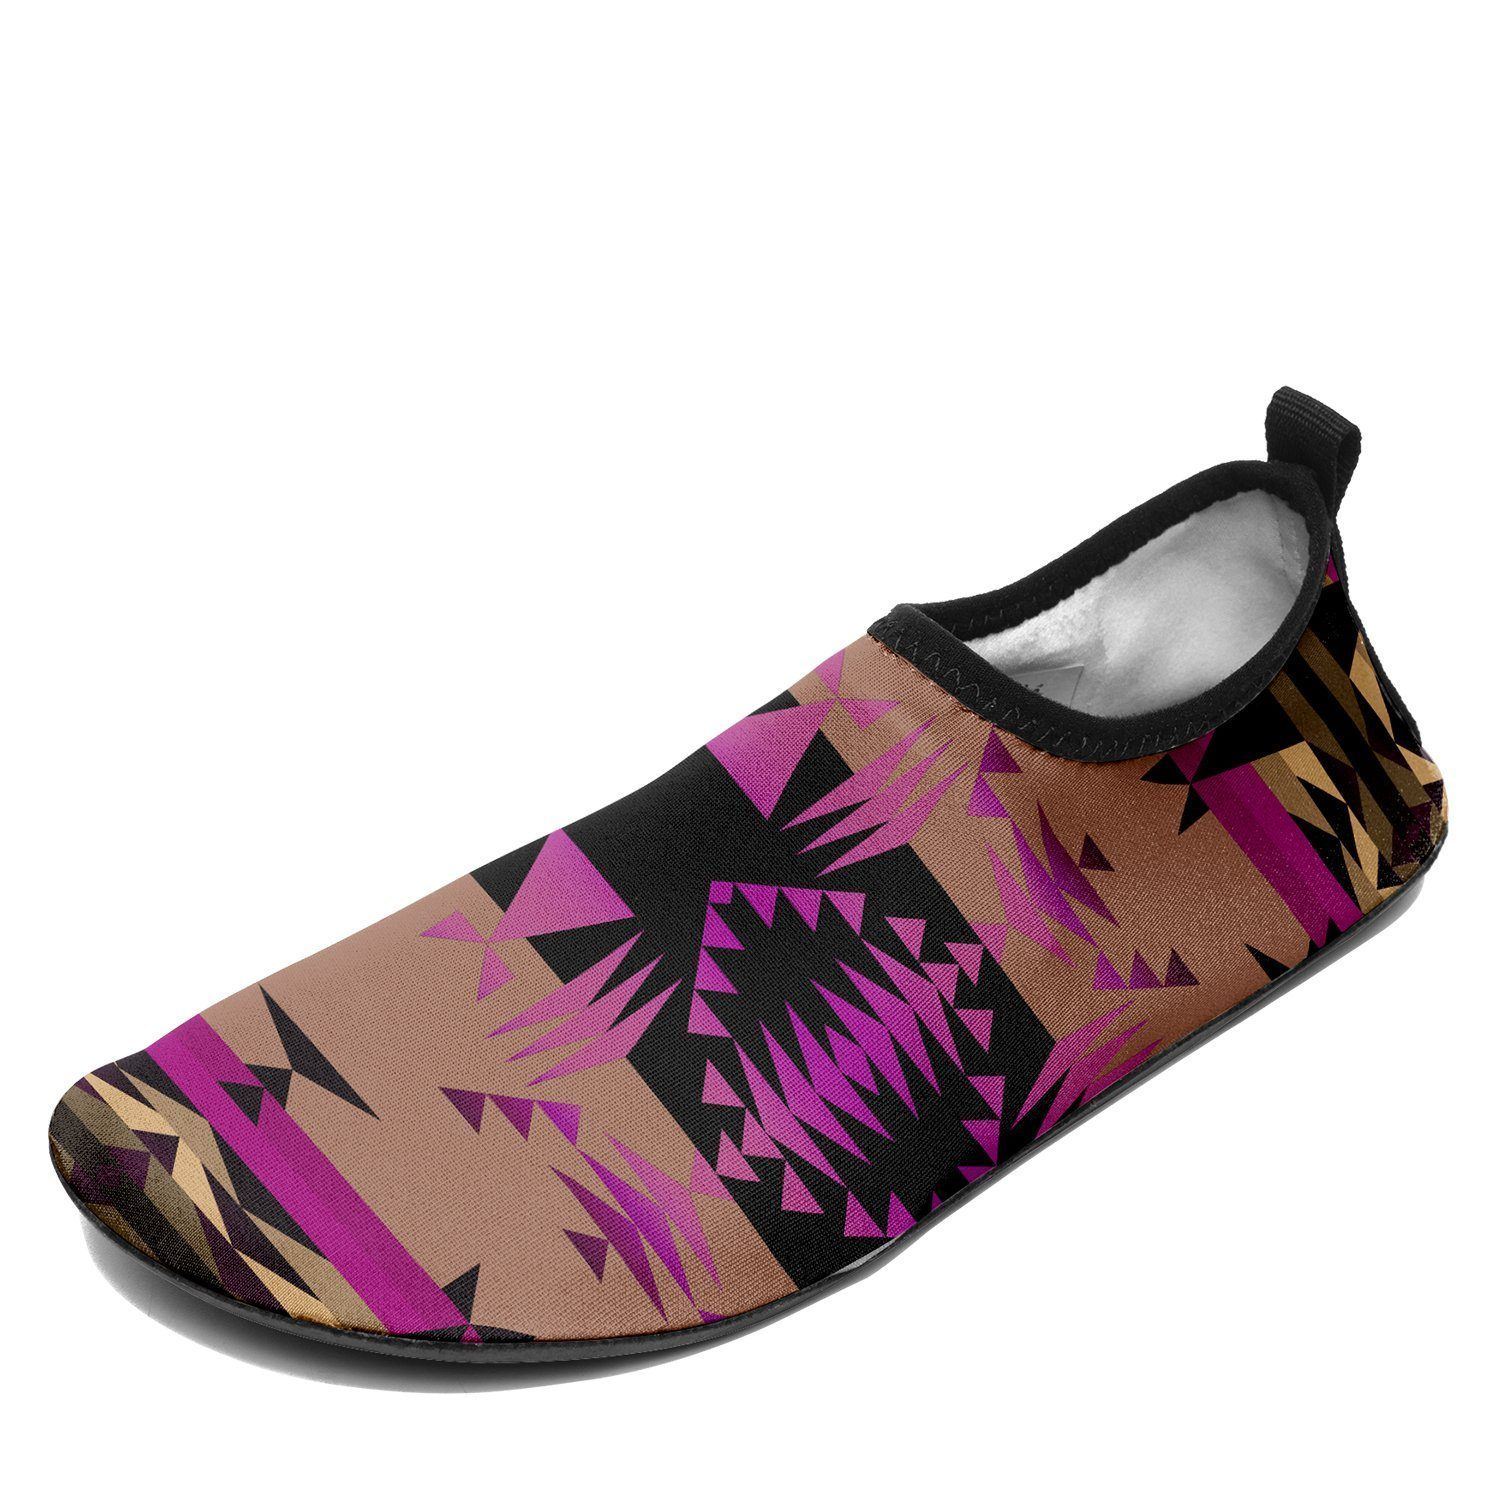 Between the Mountains Berry Sockamoccs Kid's Slip On Shoes 49 Dzine 